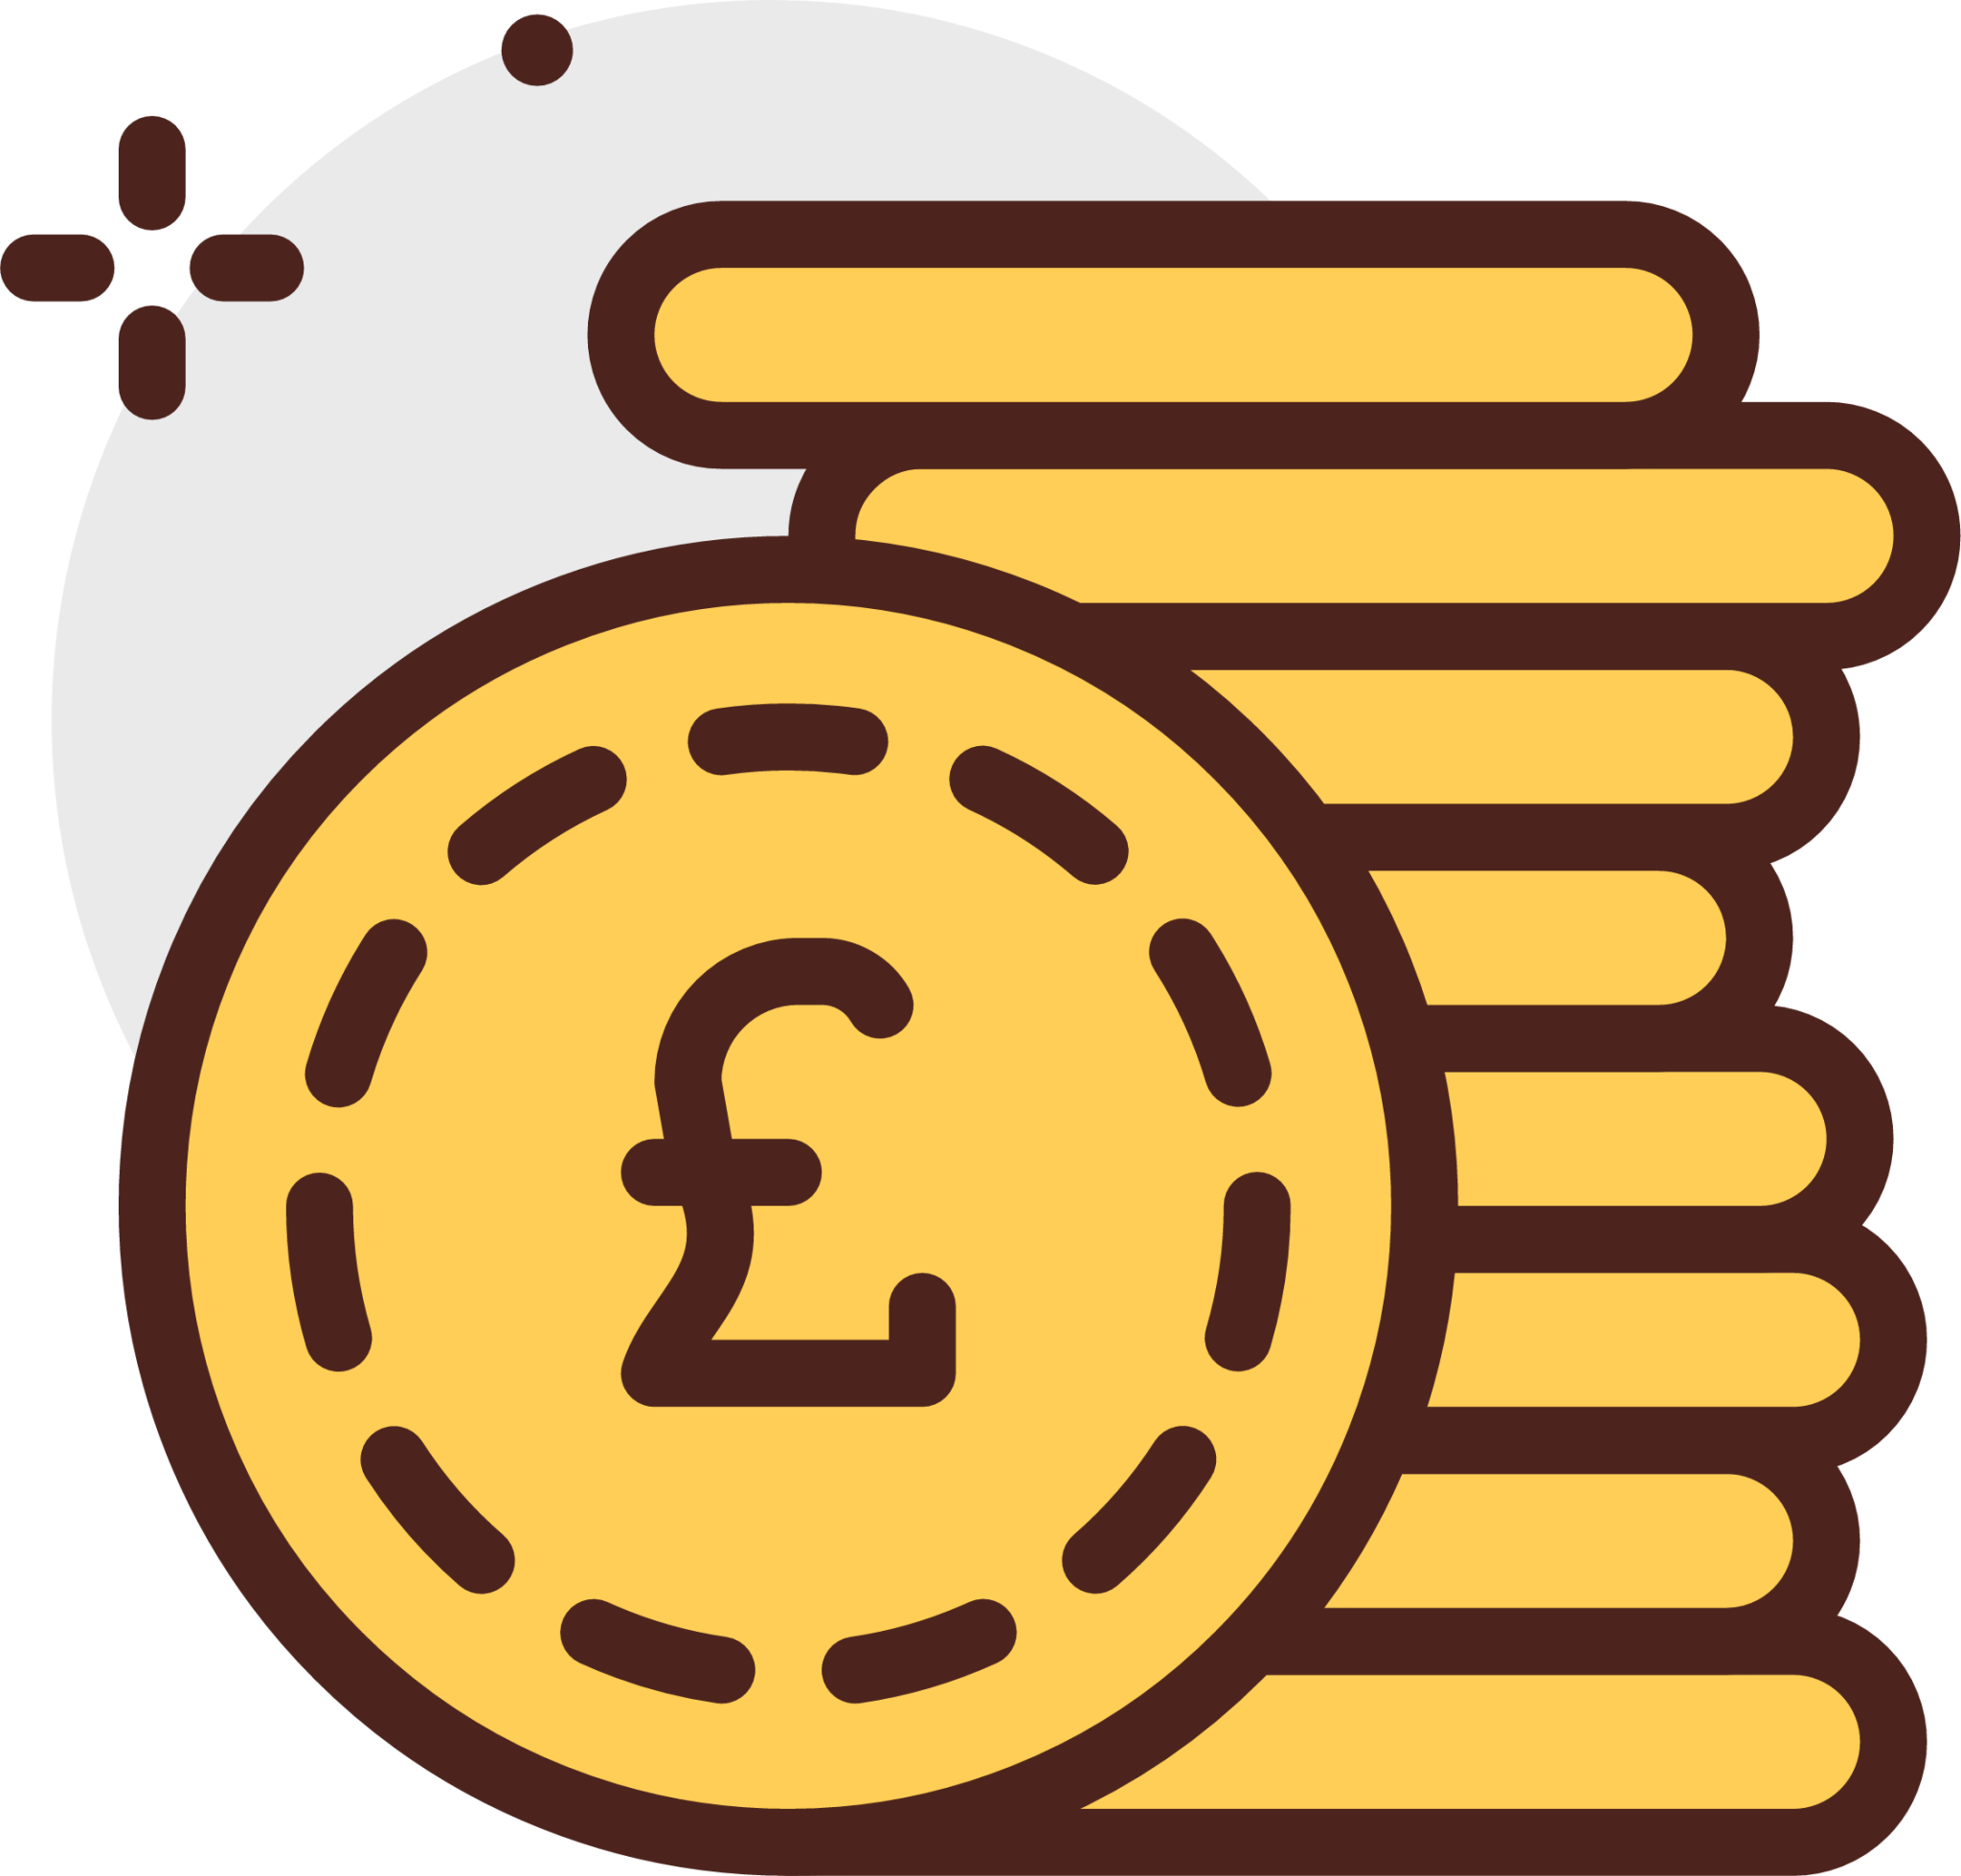 coins icon png